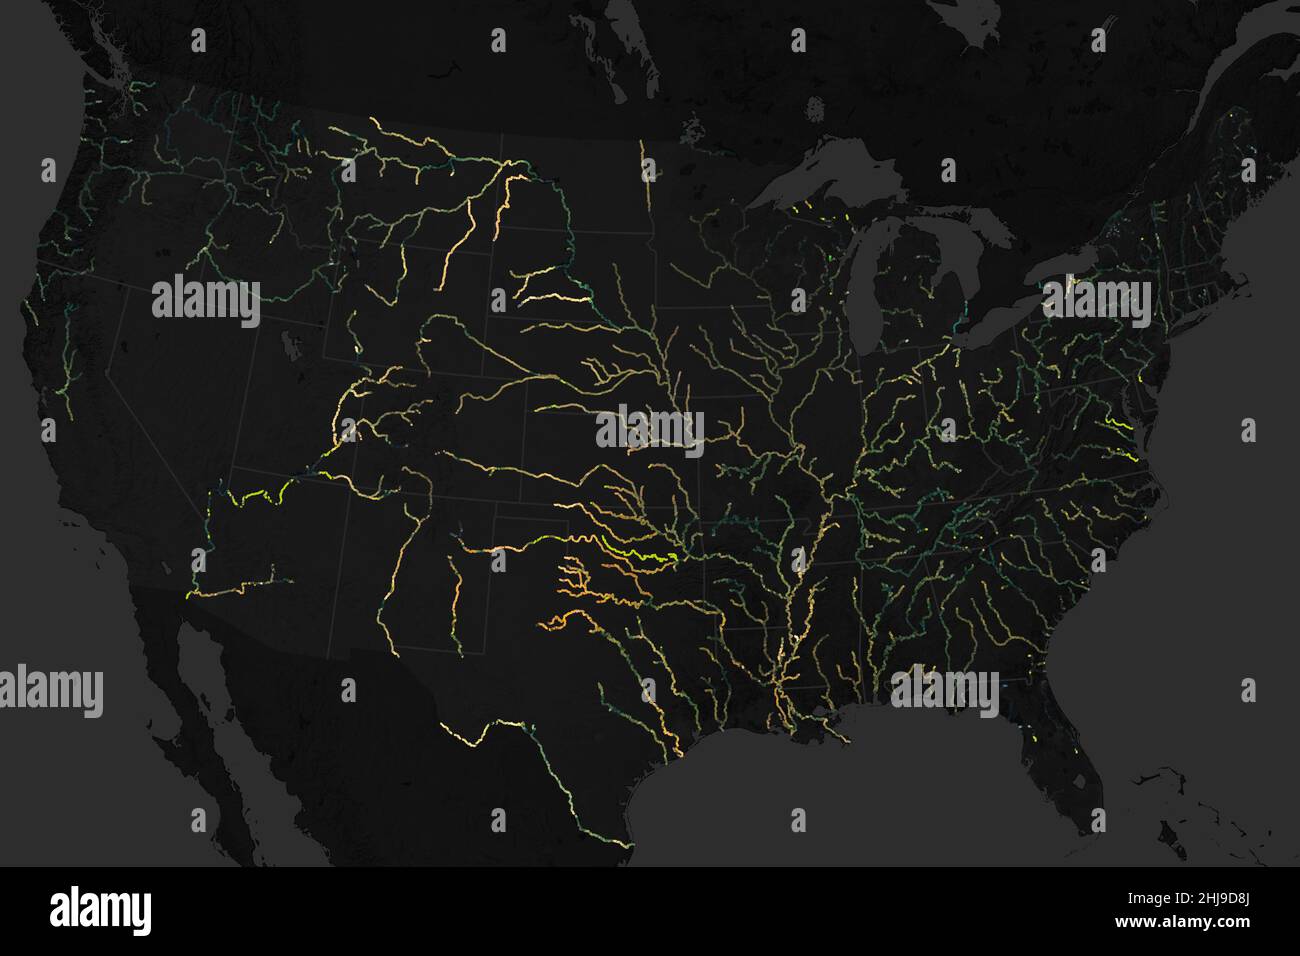 Much like the sky, rivers are rarely painted one color. Rivers around the world appear in shades of yellow, green, blue, and brownand subtle changes in the environment can alter their colors. New research shows the dominant color has changed in about one-third of large rivers in the continental United States over the past 35 years. The figure above shows data from a map of river color for the contiguous United States. The rivers are colored as they would approximately appear to the human eye. The map was built from 234,727 images collected by Landsat satellites between 1984 and 2018. The data Stock Photo